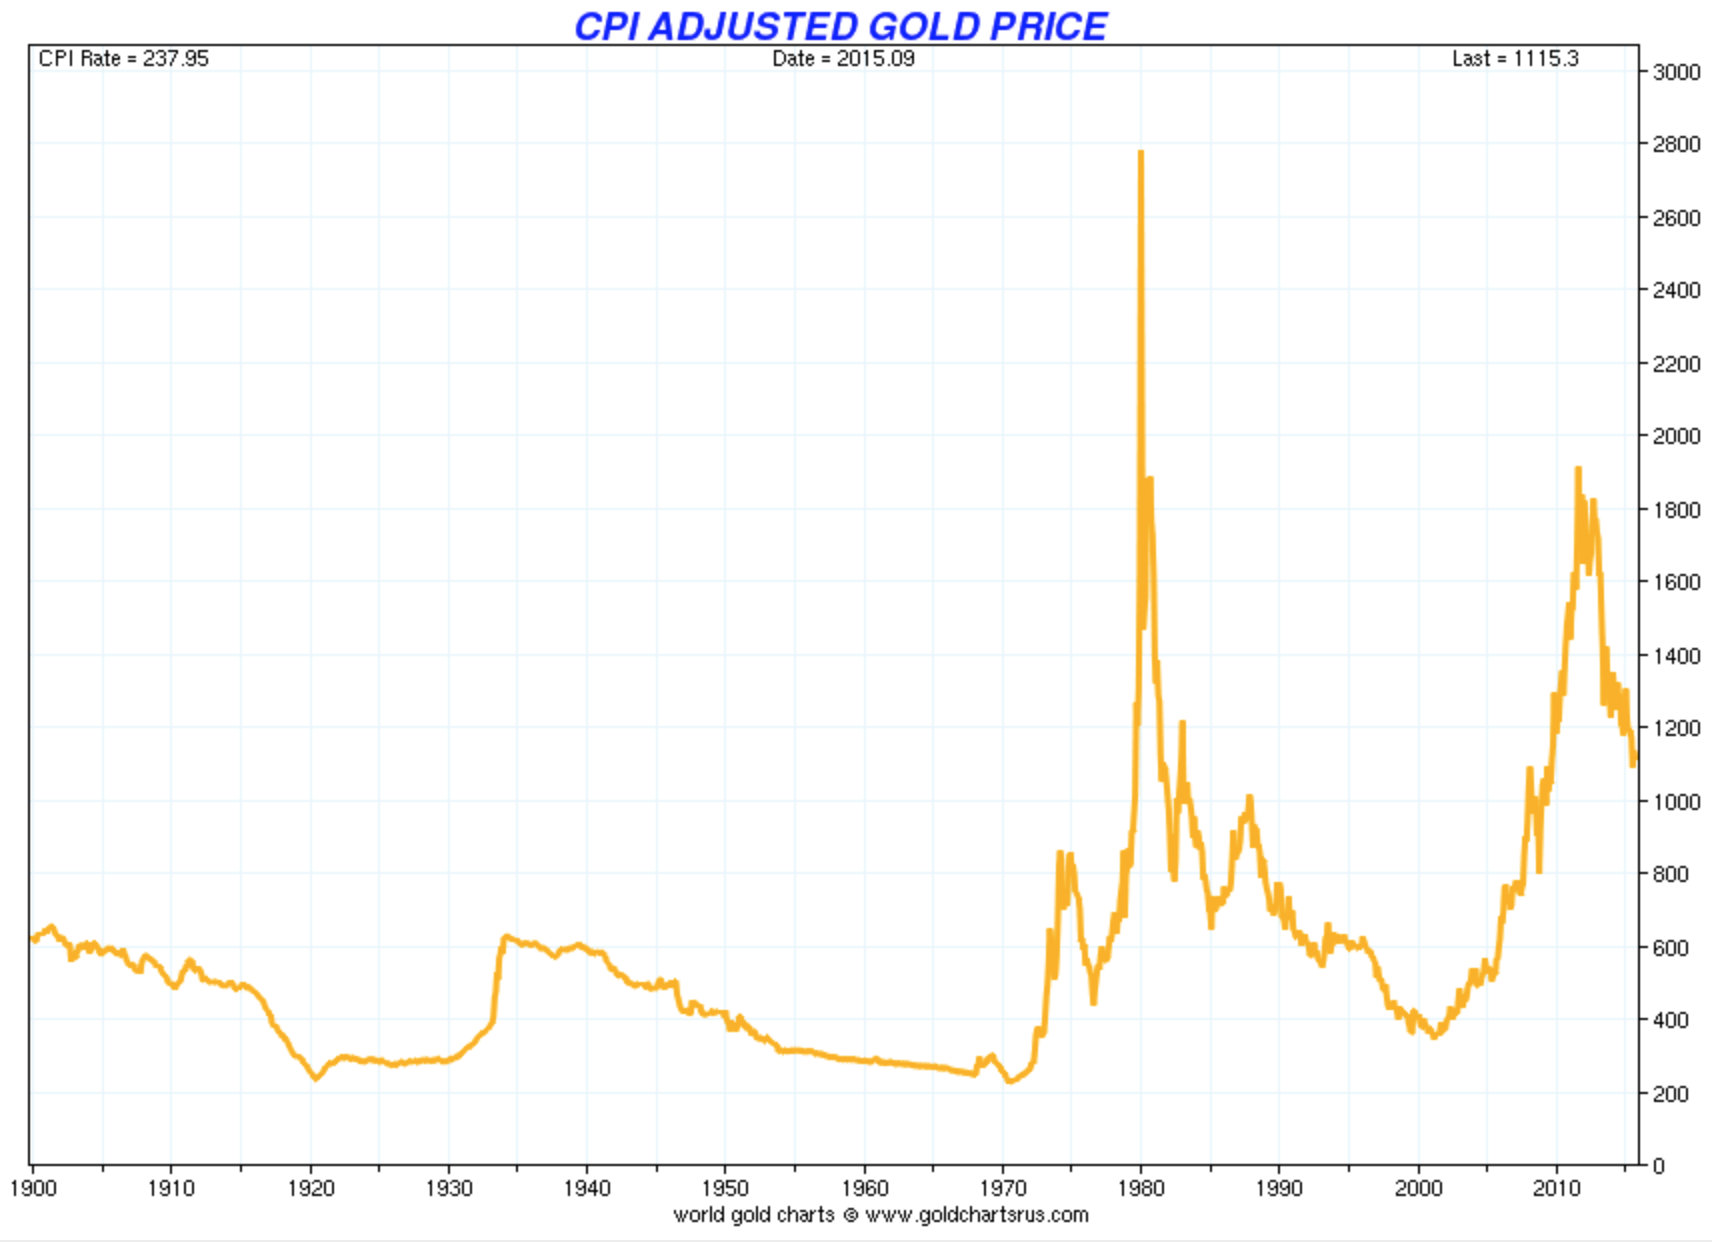 Gold price adjusted by official inflation as calculated since 1980